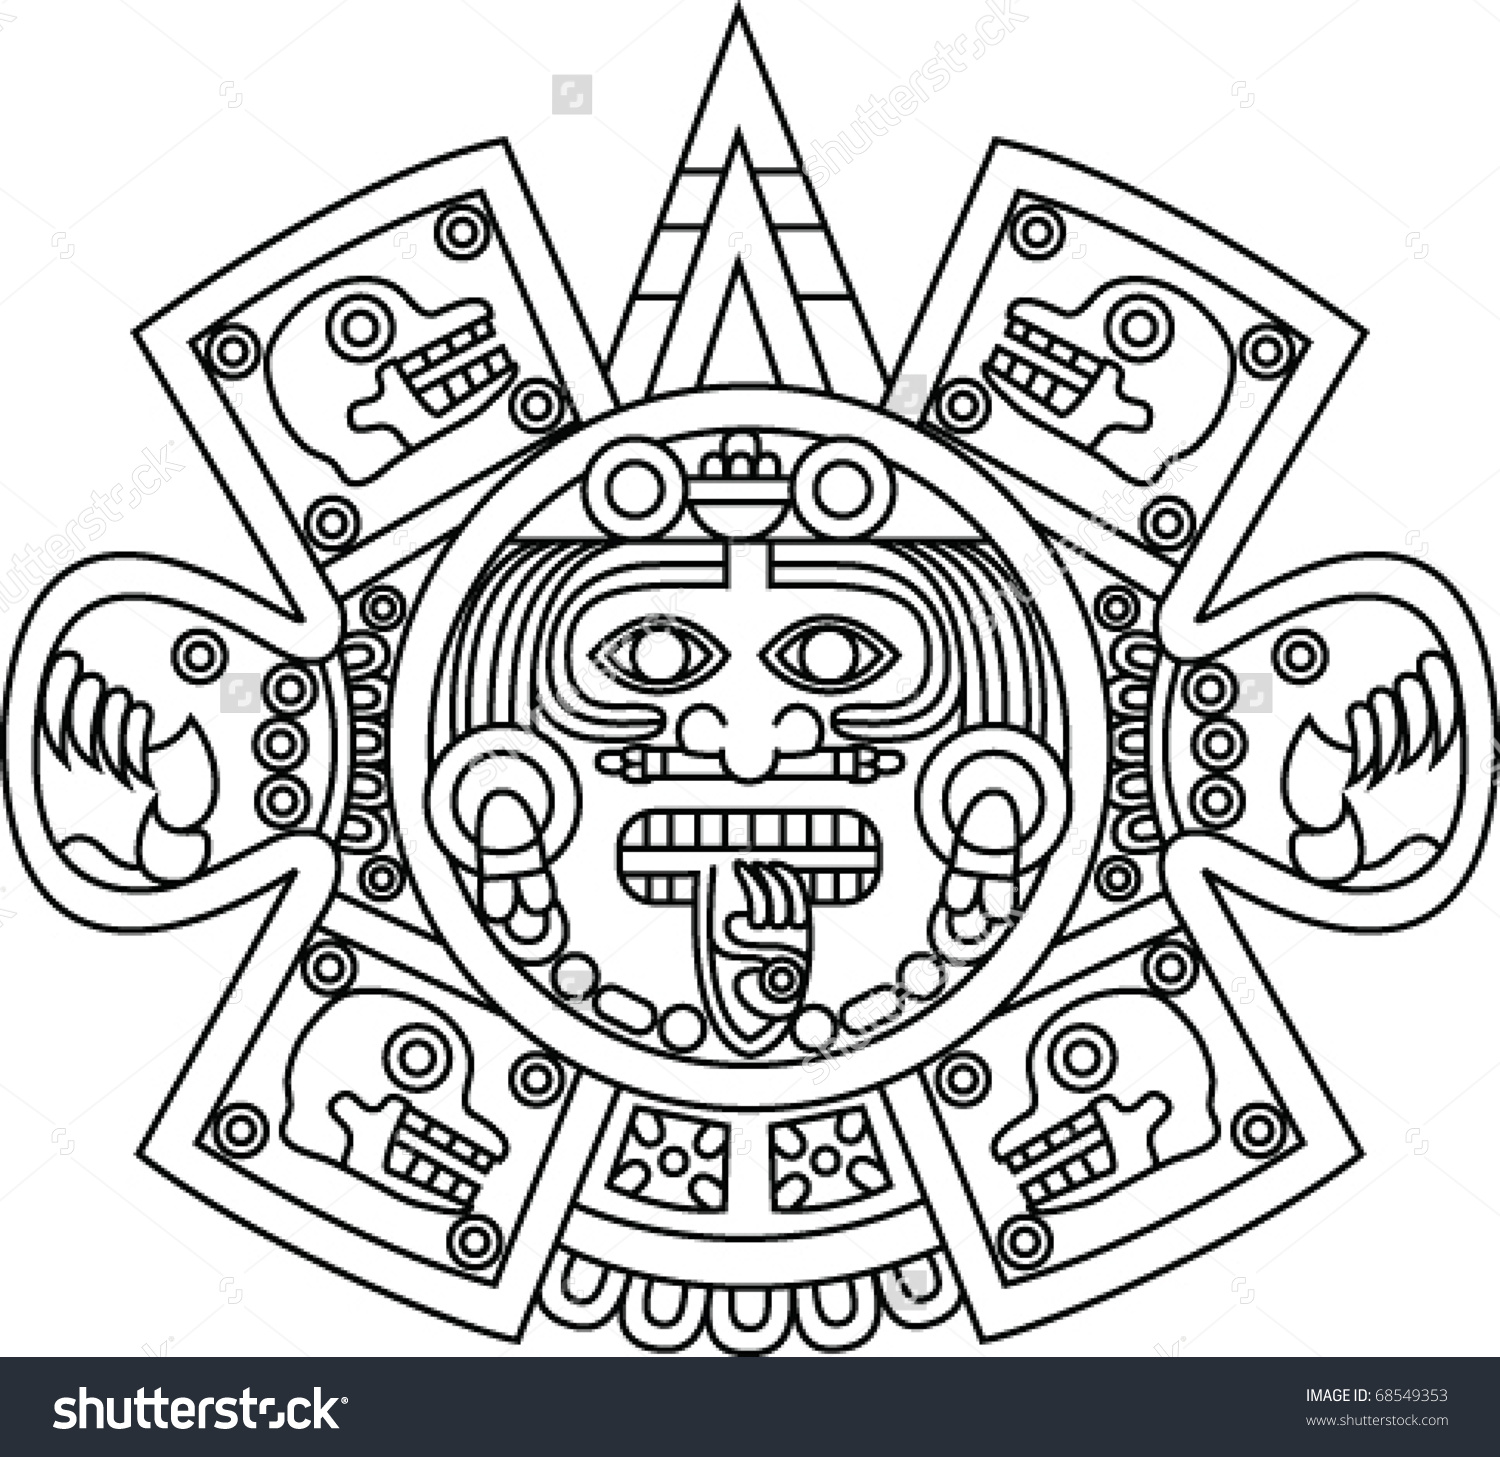 The best free Aztec vector images. Download from 171 free vectors of ...